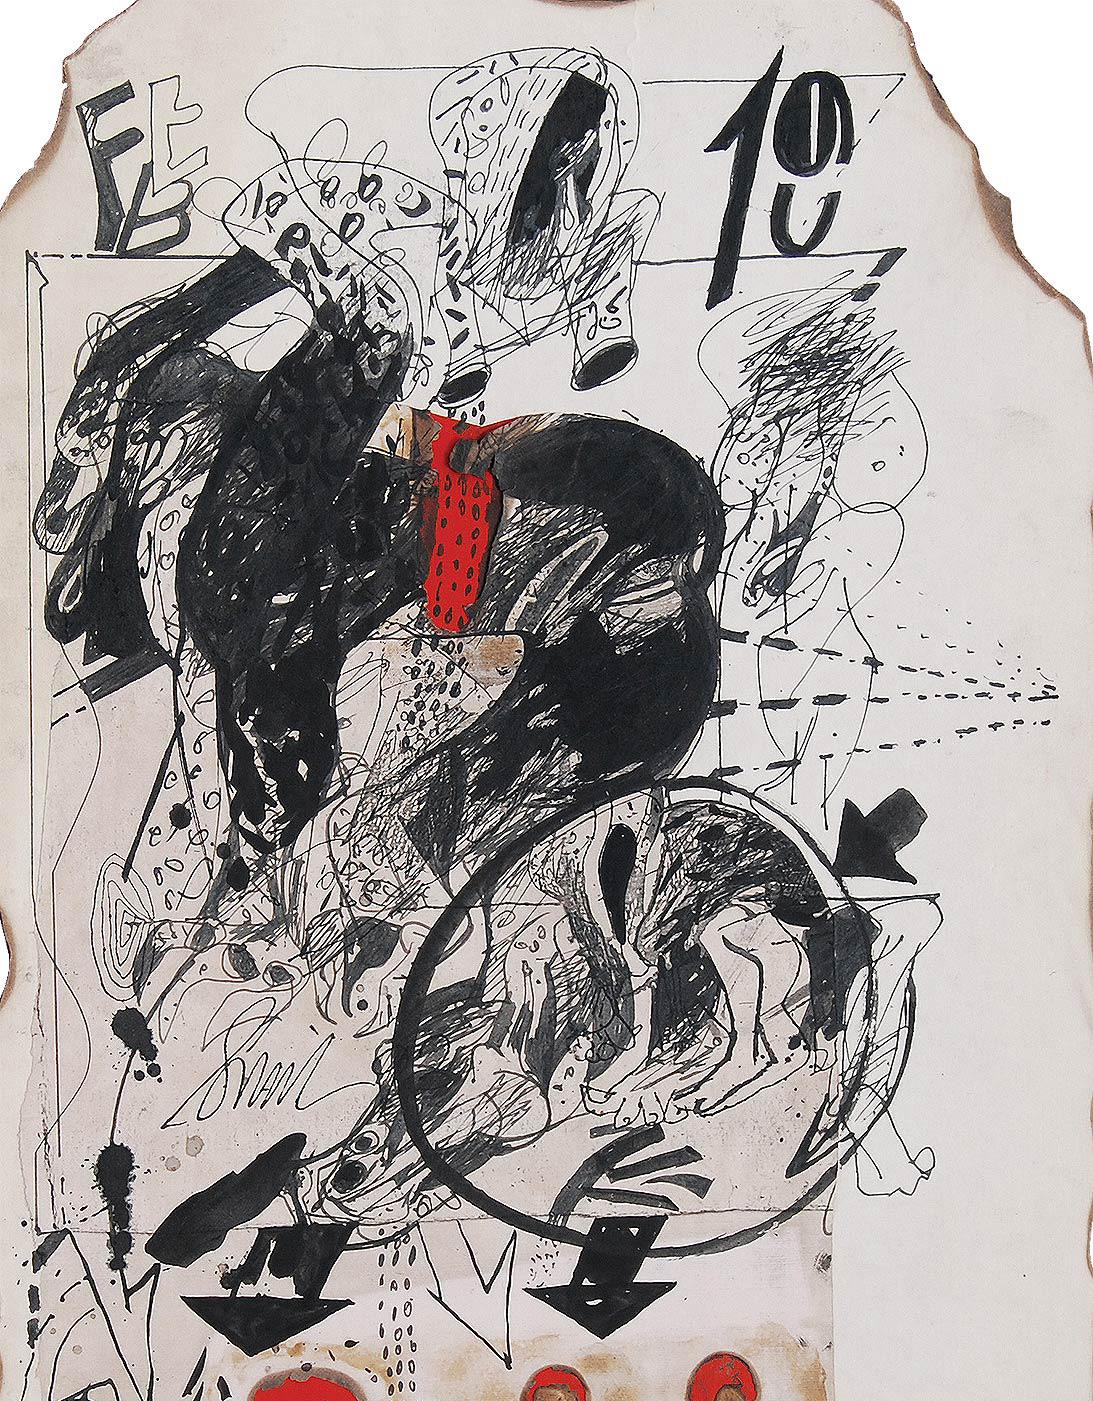 Sunil Das - Collage based Drawings - 11 X 9 inches (unframed size)
Mixed Media on Board
Inclusive of shipment in ready to hang form.

Sunil Das (1939-2015) was a Master Modern Indian Artist from Bengal. Extremely successful right from his college